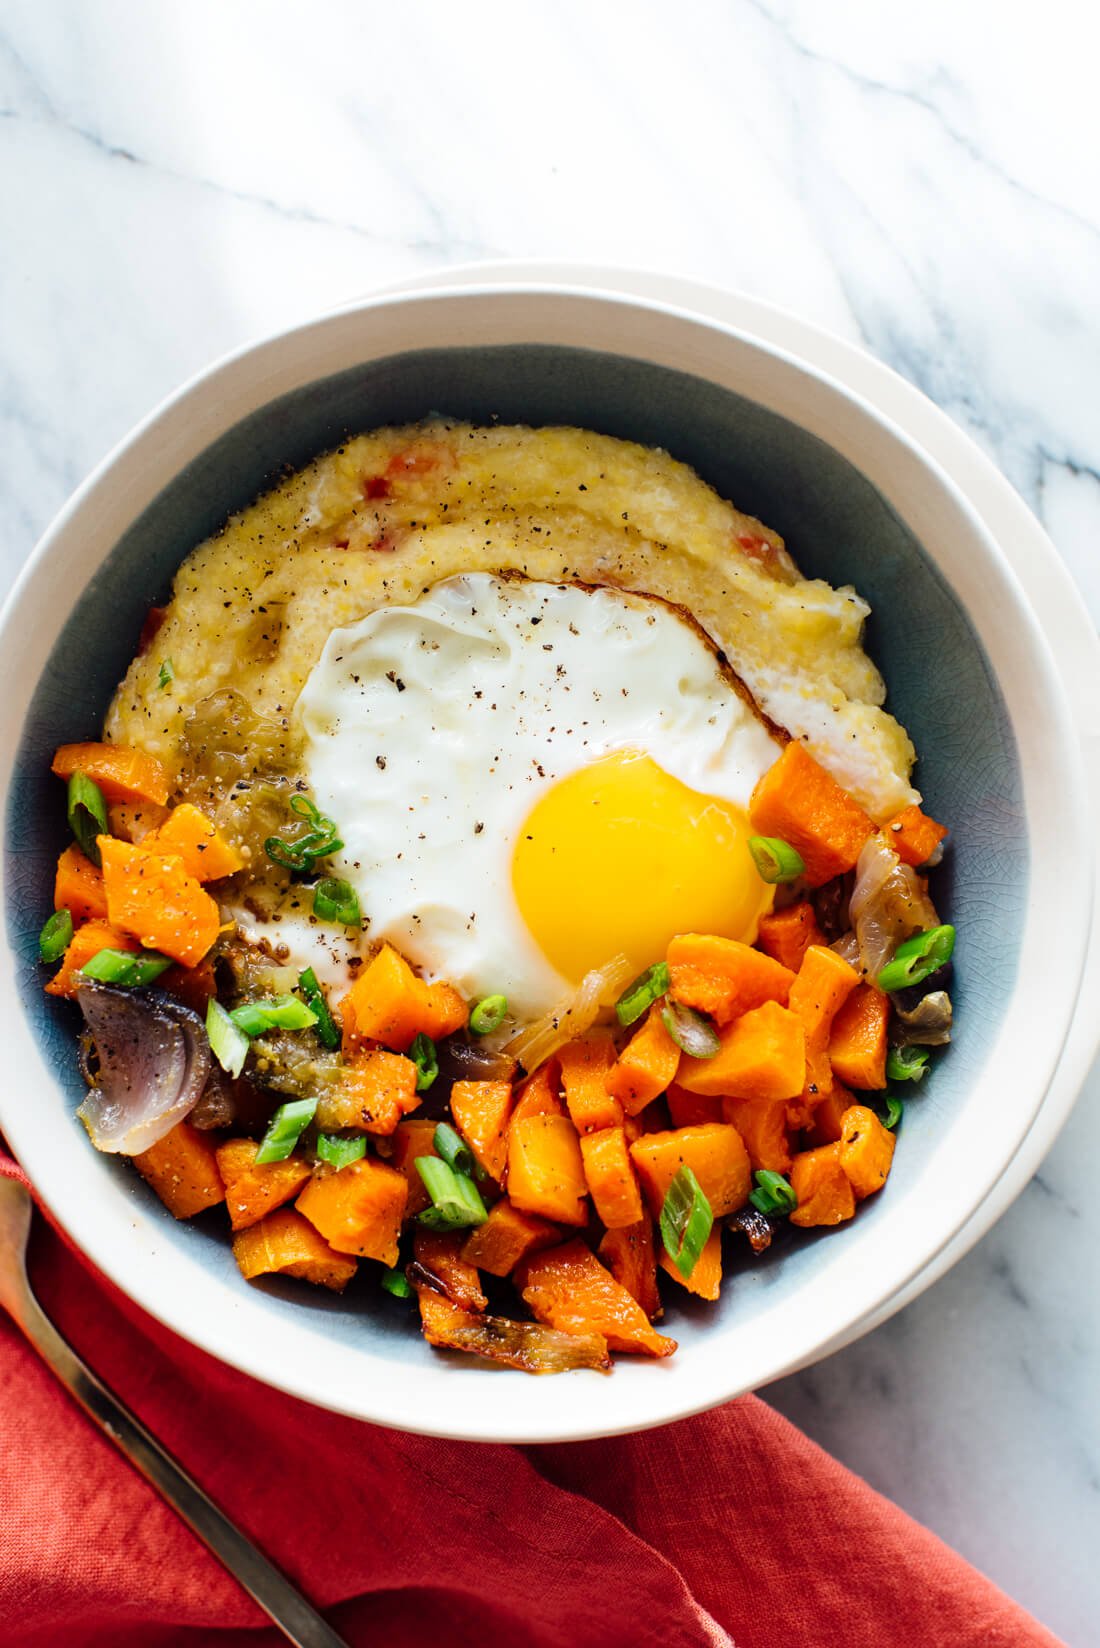 Here's a brunch-worthy meal that you can serve for dinner, too! This goat cheese polenta recipe is full of vegetables.